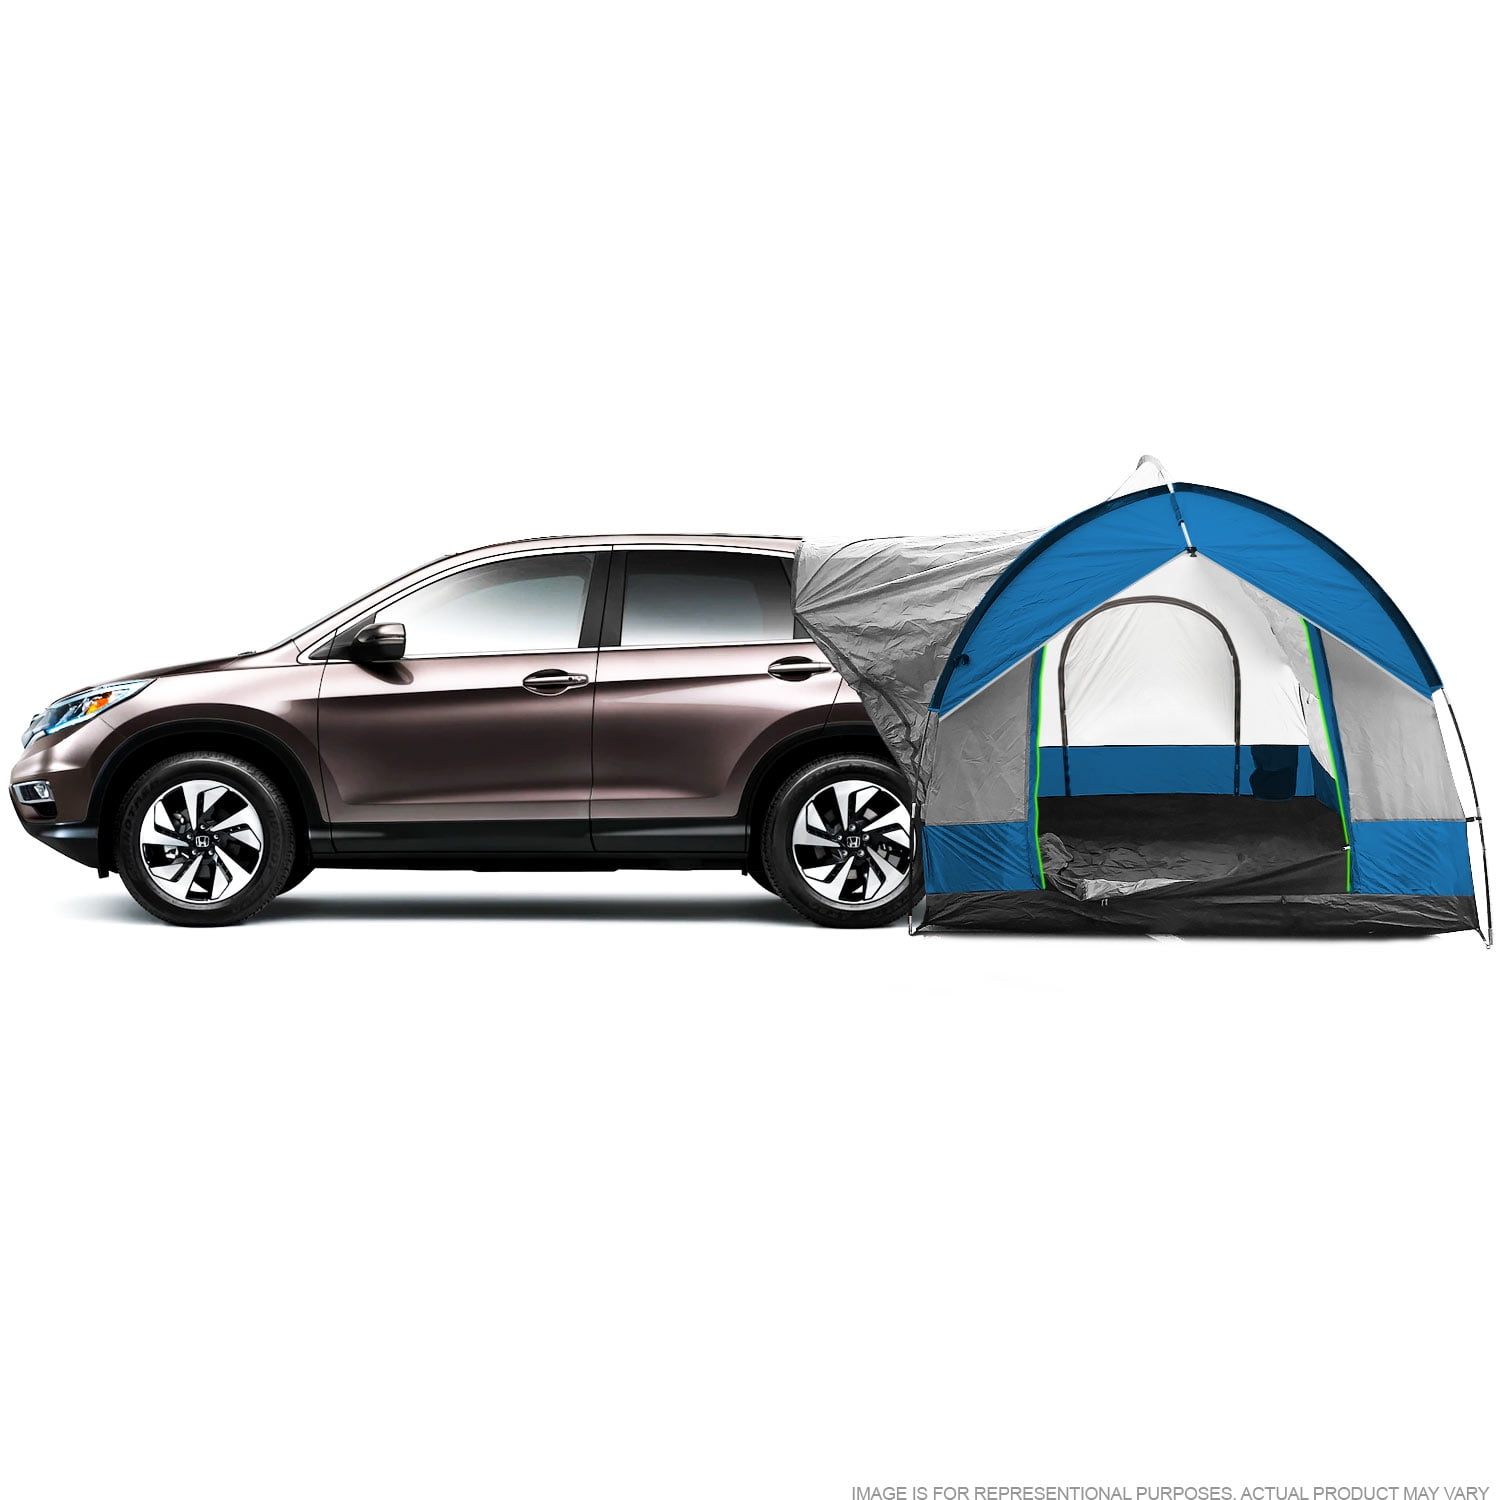 North East Harbor Universal SUV Camping Tent - Up to 8-Person Sleeping